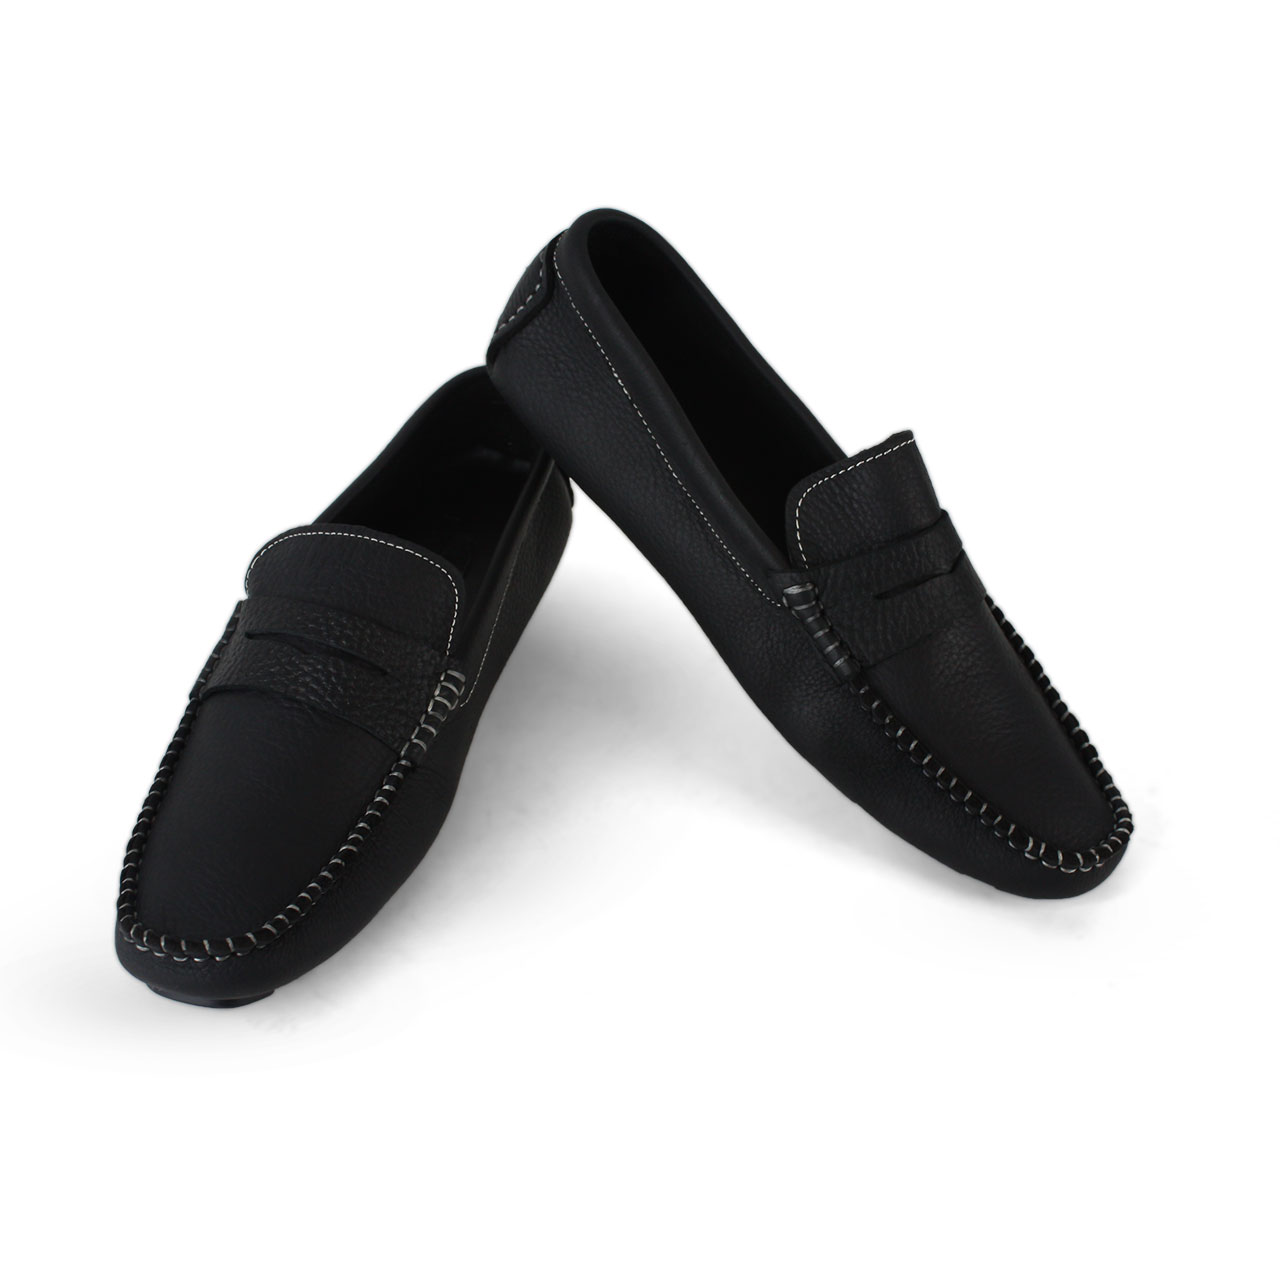 Mens Suede Black Loafers Slip On Casual Penny Flats Heel Shoes